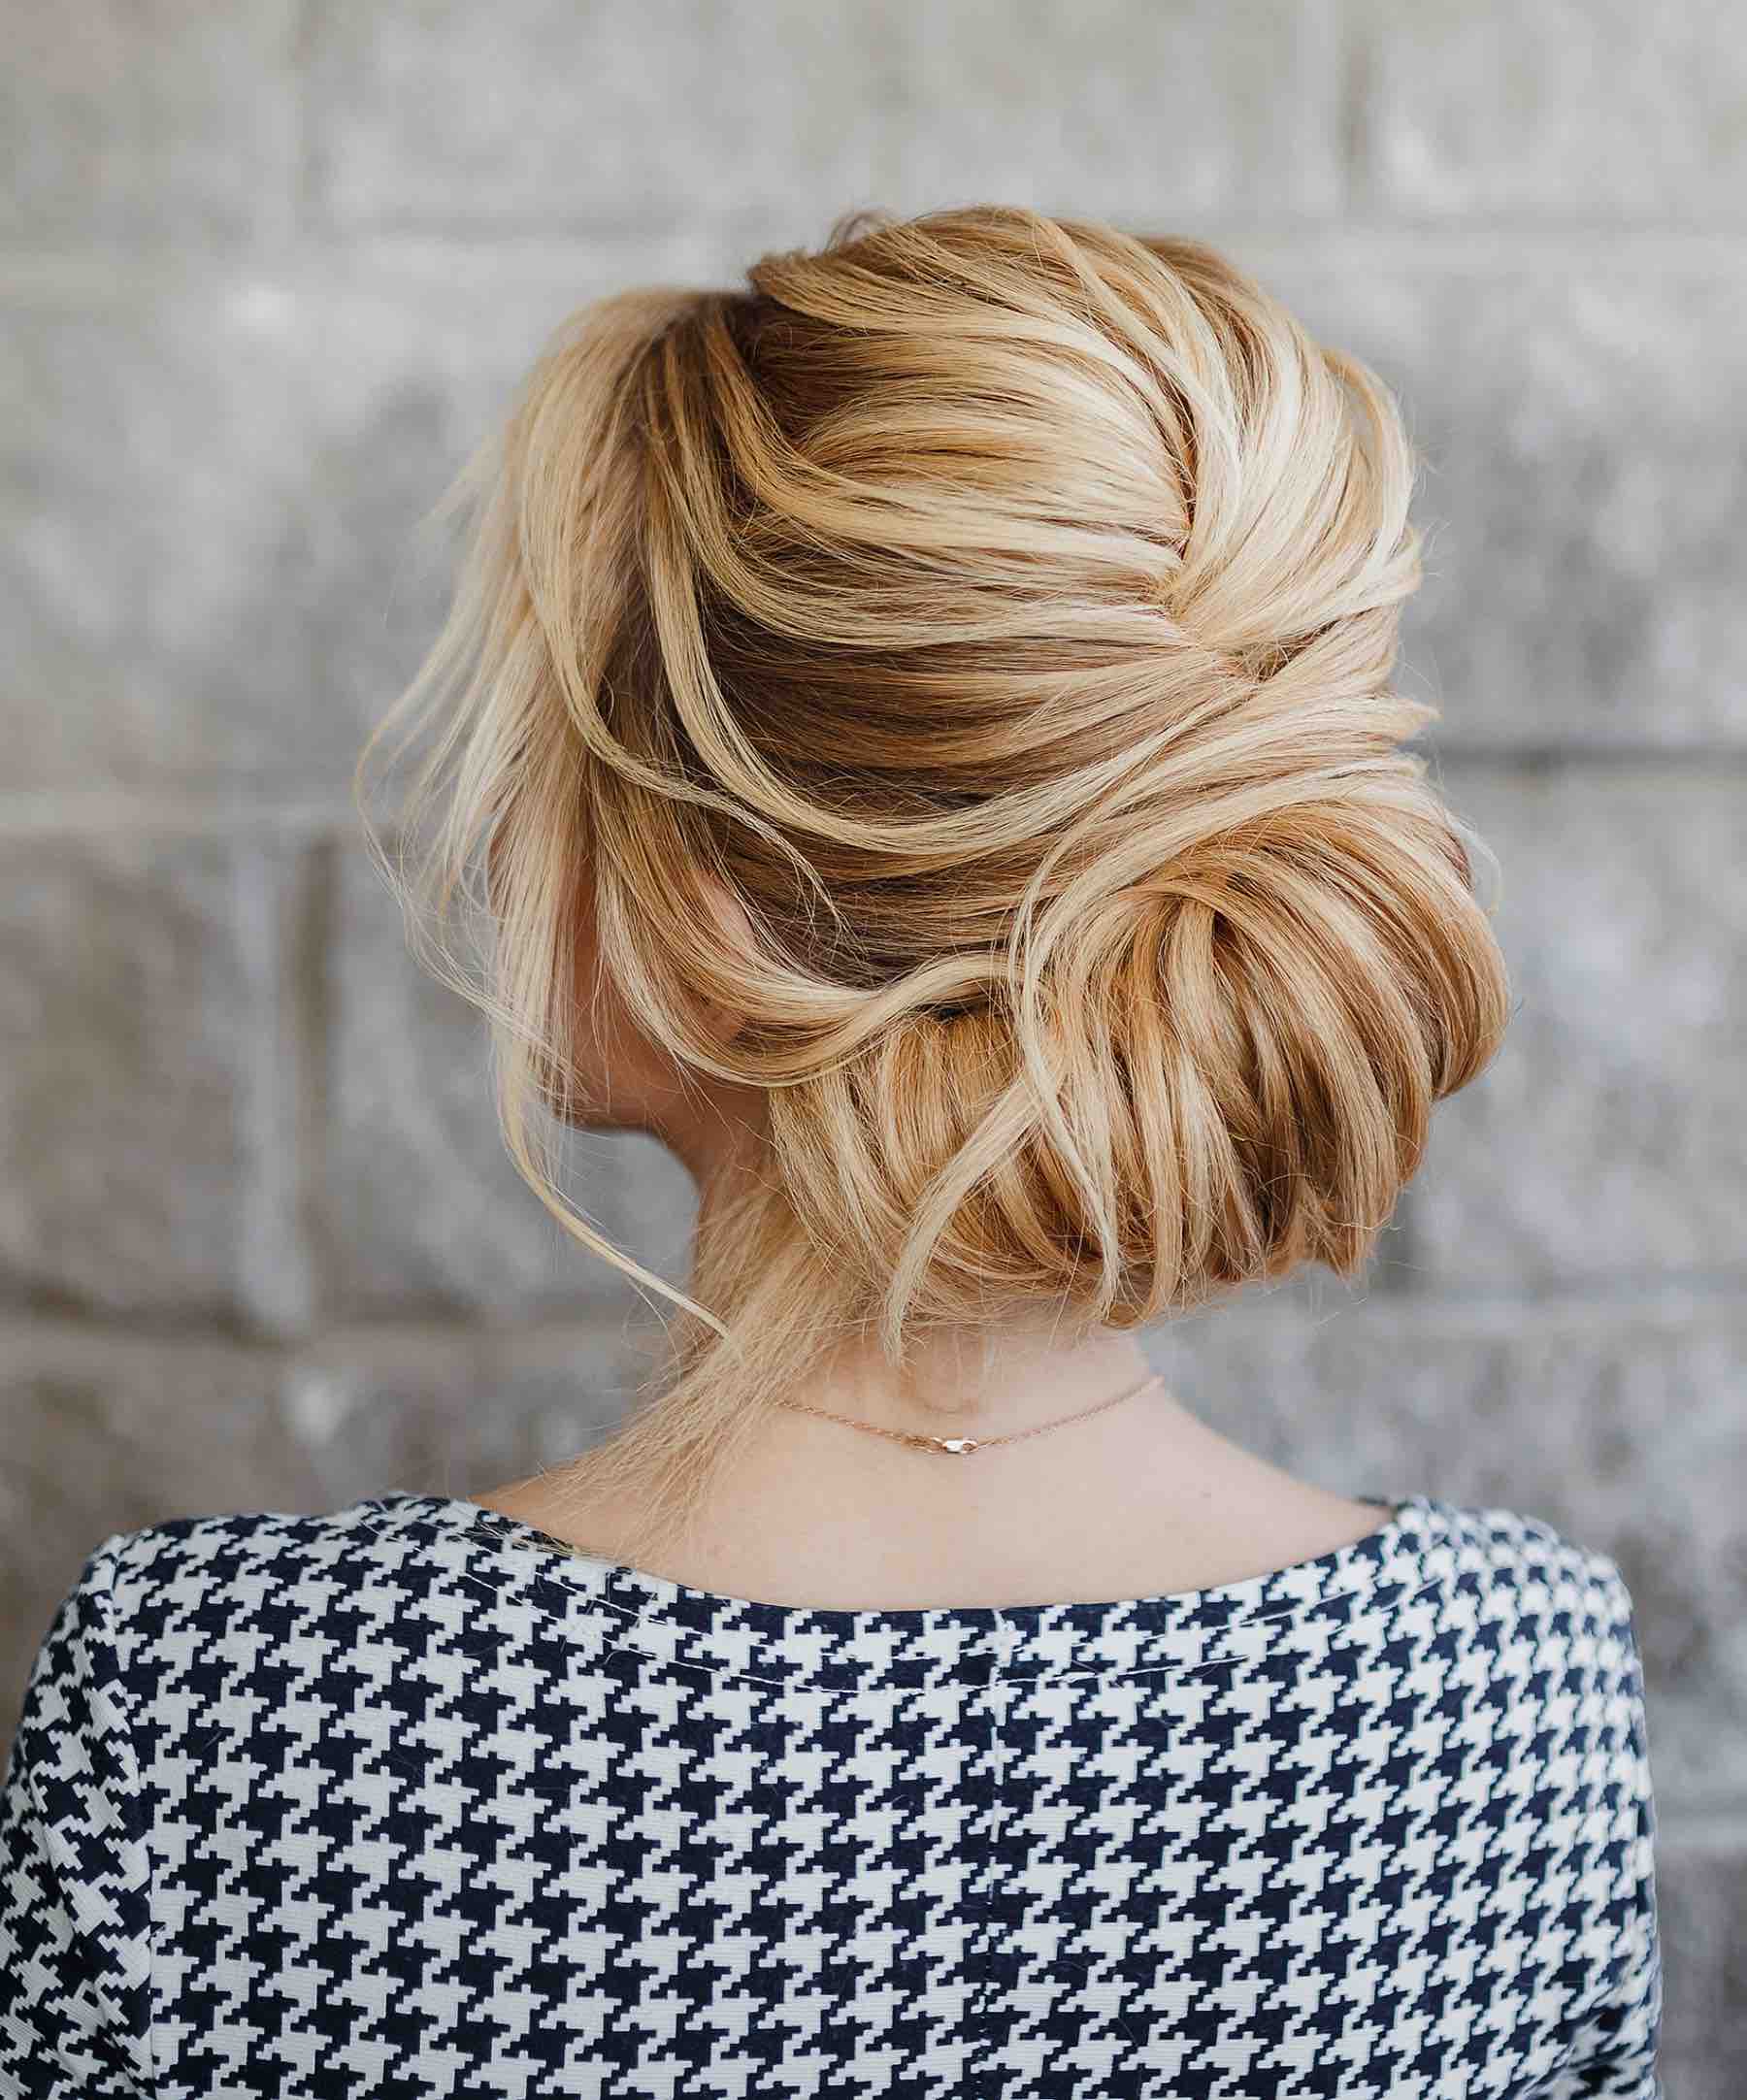 7 Easy Holiday Hairstyles